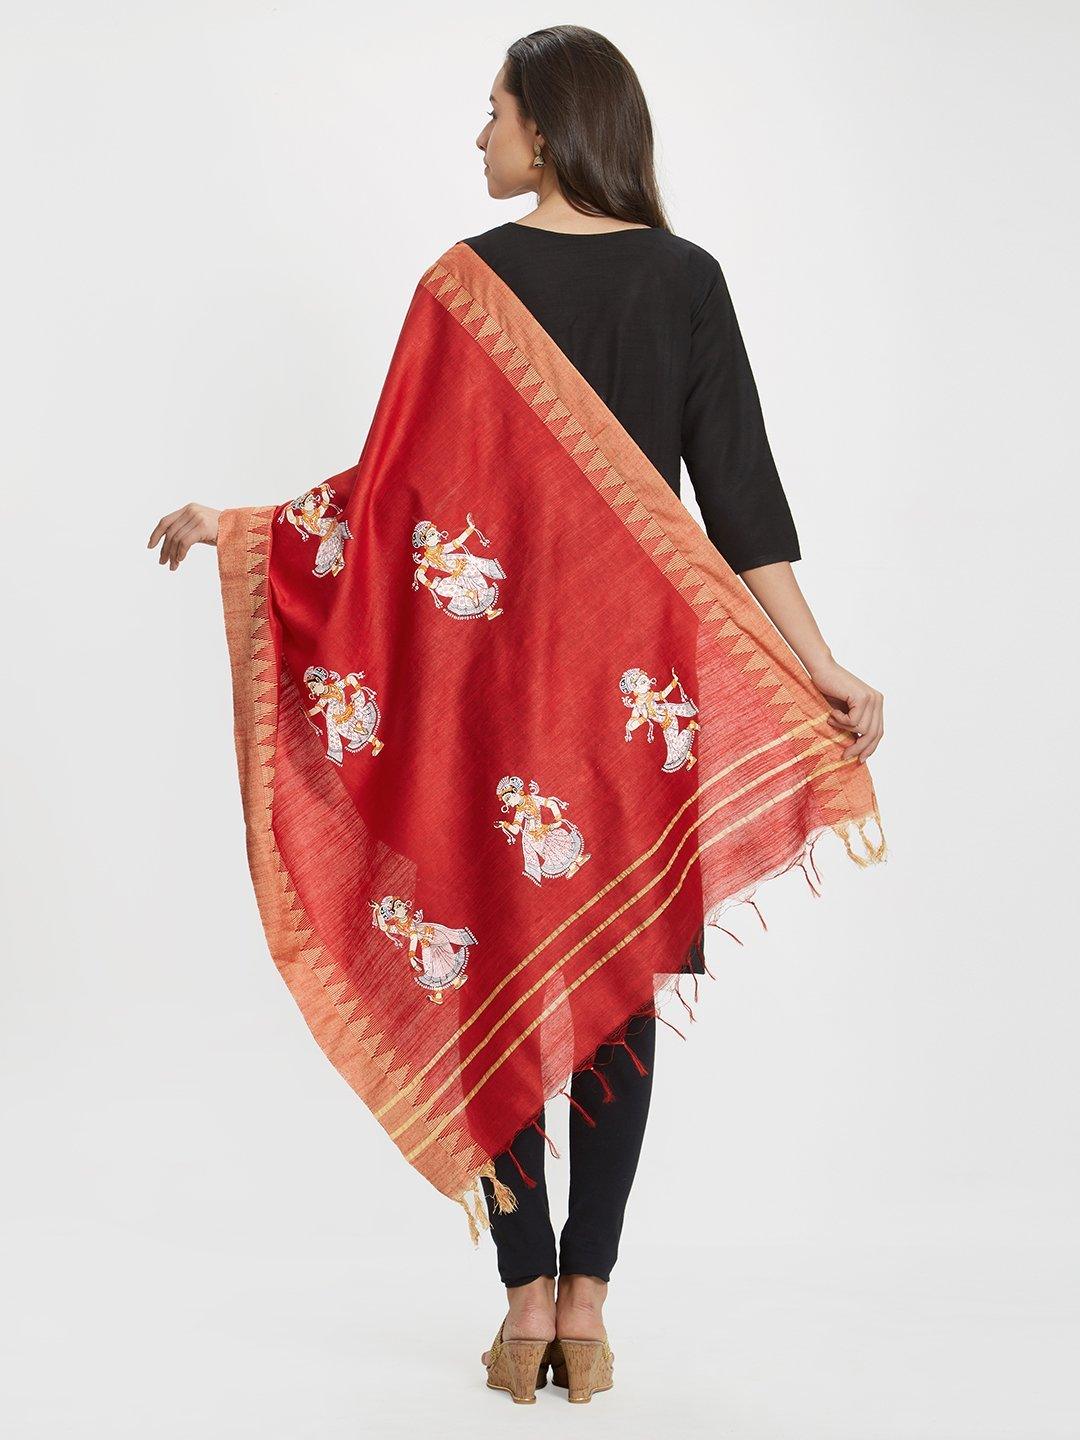 CraftsCollection.in - Red Dupatta with handpainted Pattachitra motifs